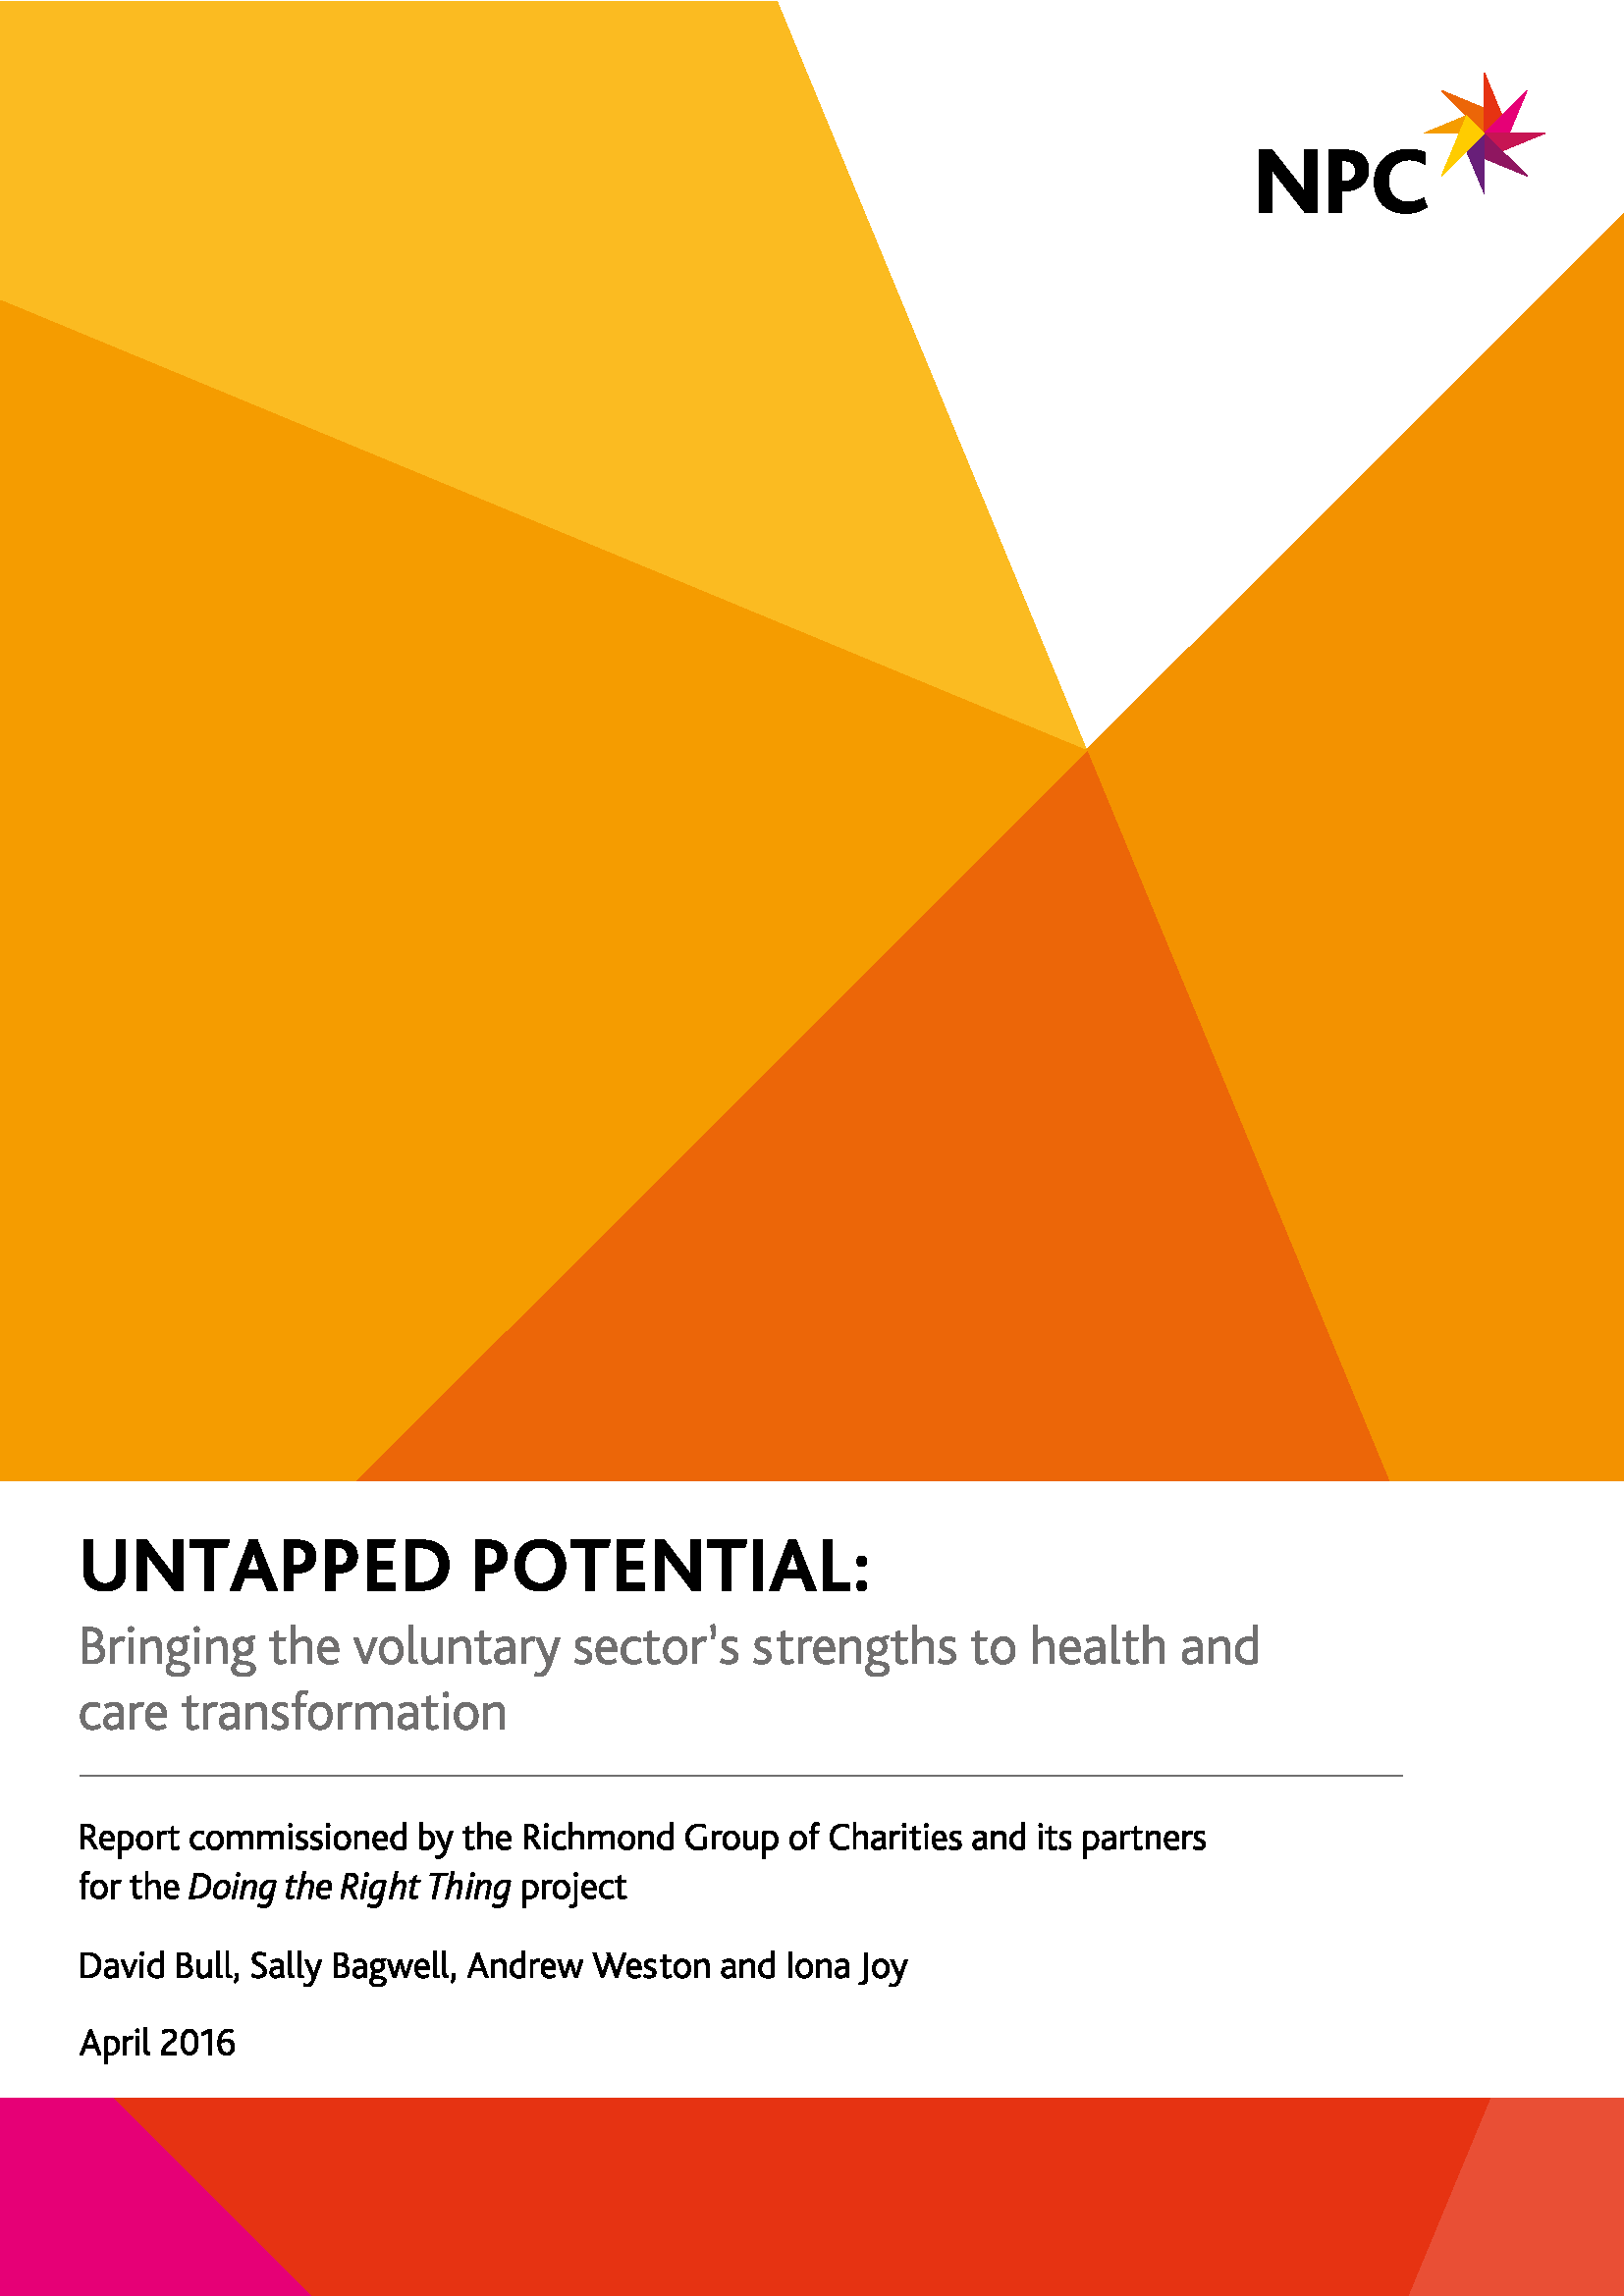 Untapped Potential: Bringing the voluntary sector’s strengths to health and care transformation